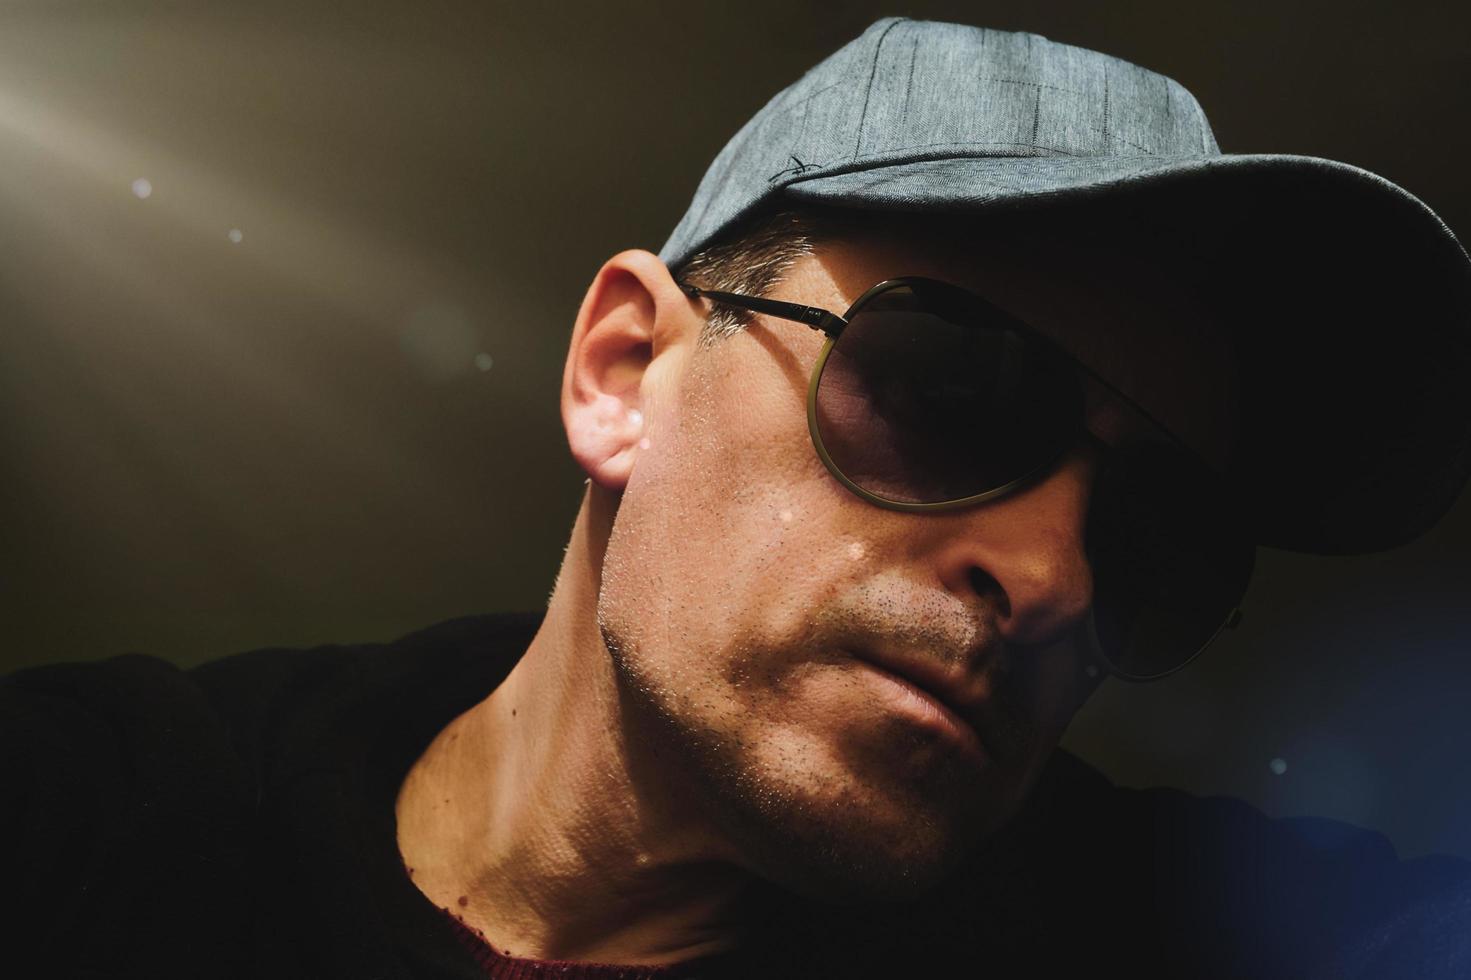 man wiht cap and sunglasses taking a selfie in the shadows photo